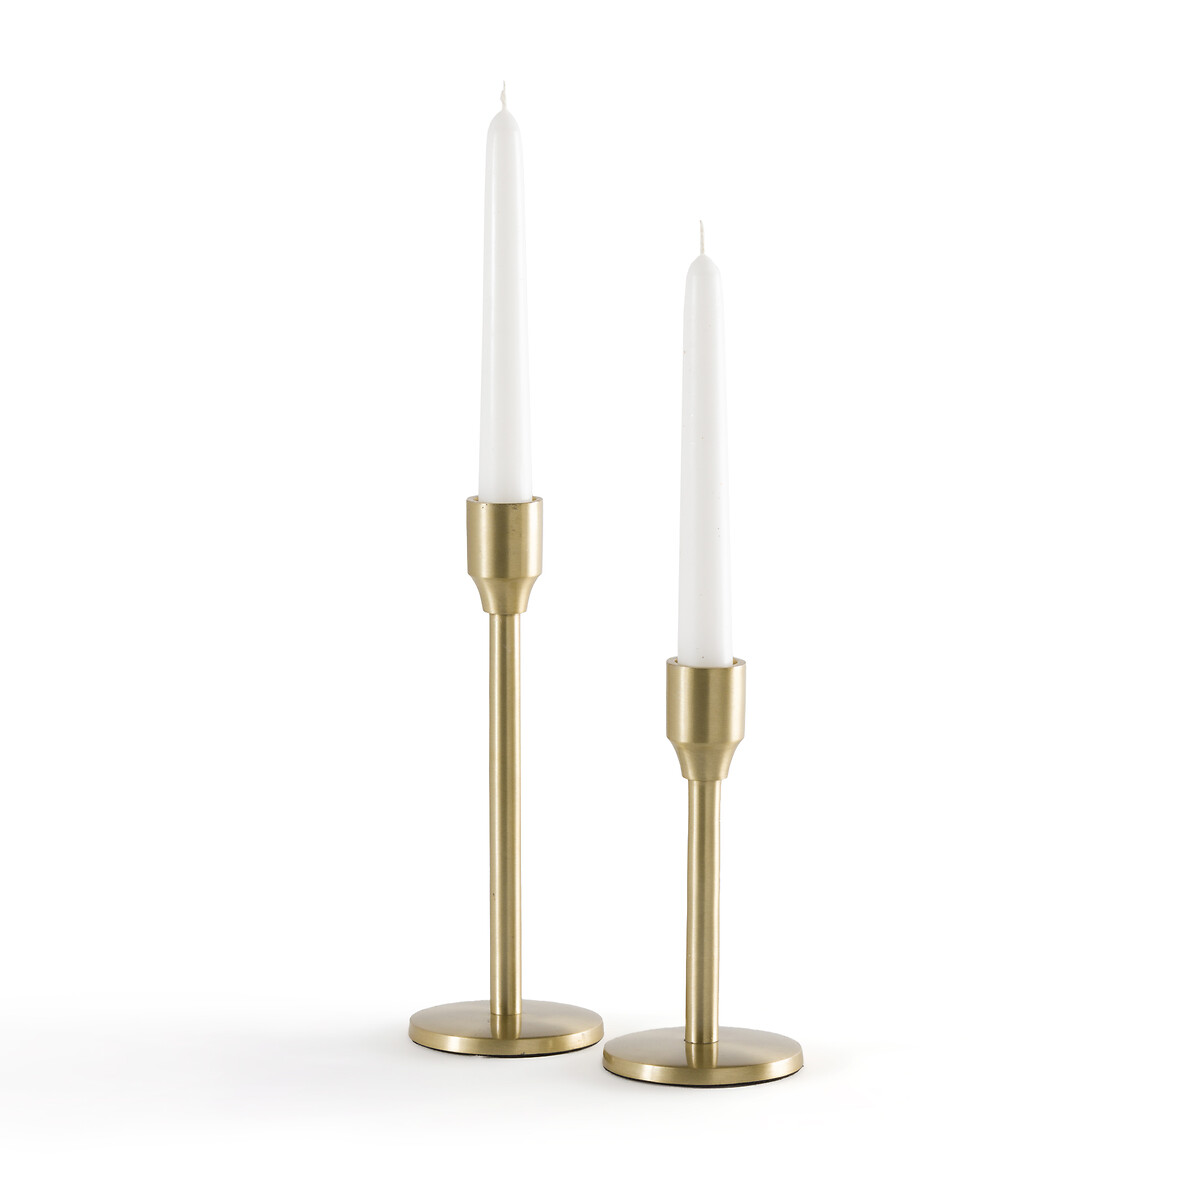 Candle Holders | Candle Holder Sets | La Redoute